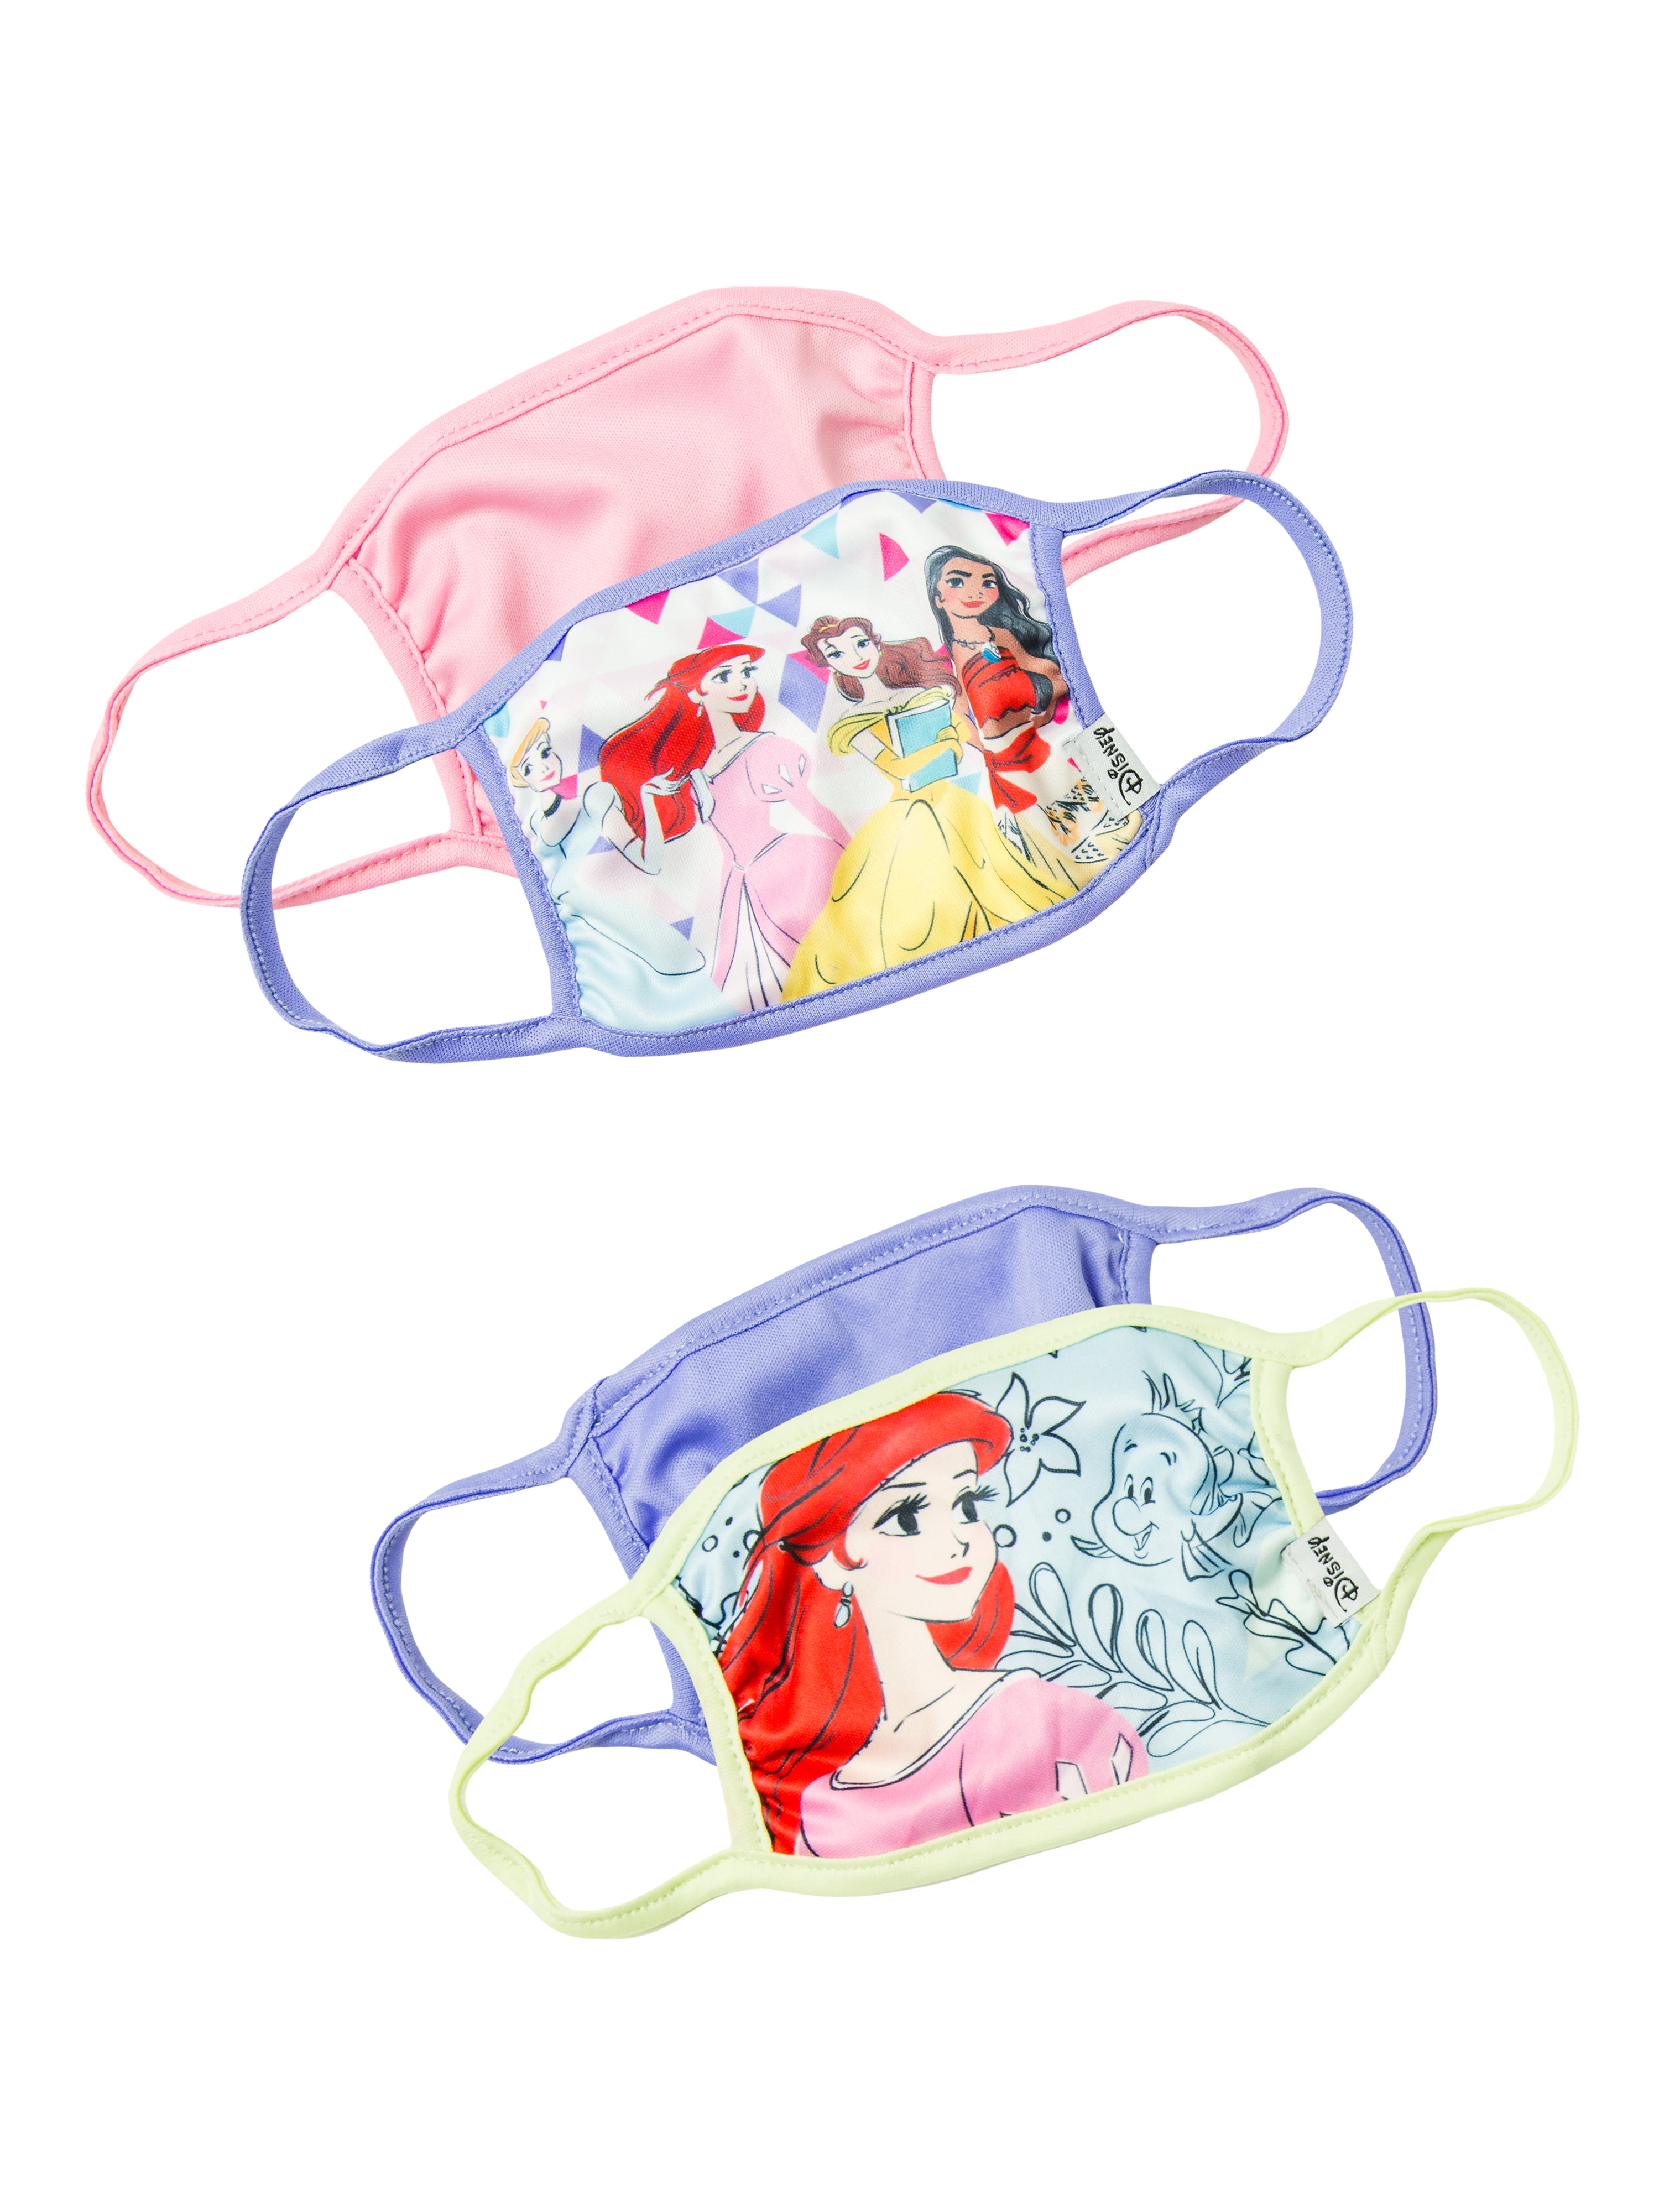 Details about   Disney Minnie mouse Face shield safetyprincess protection  Kids size 